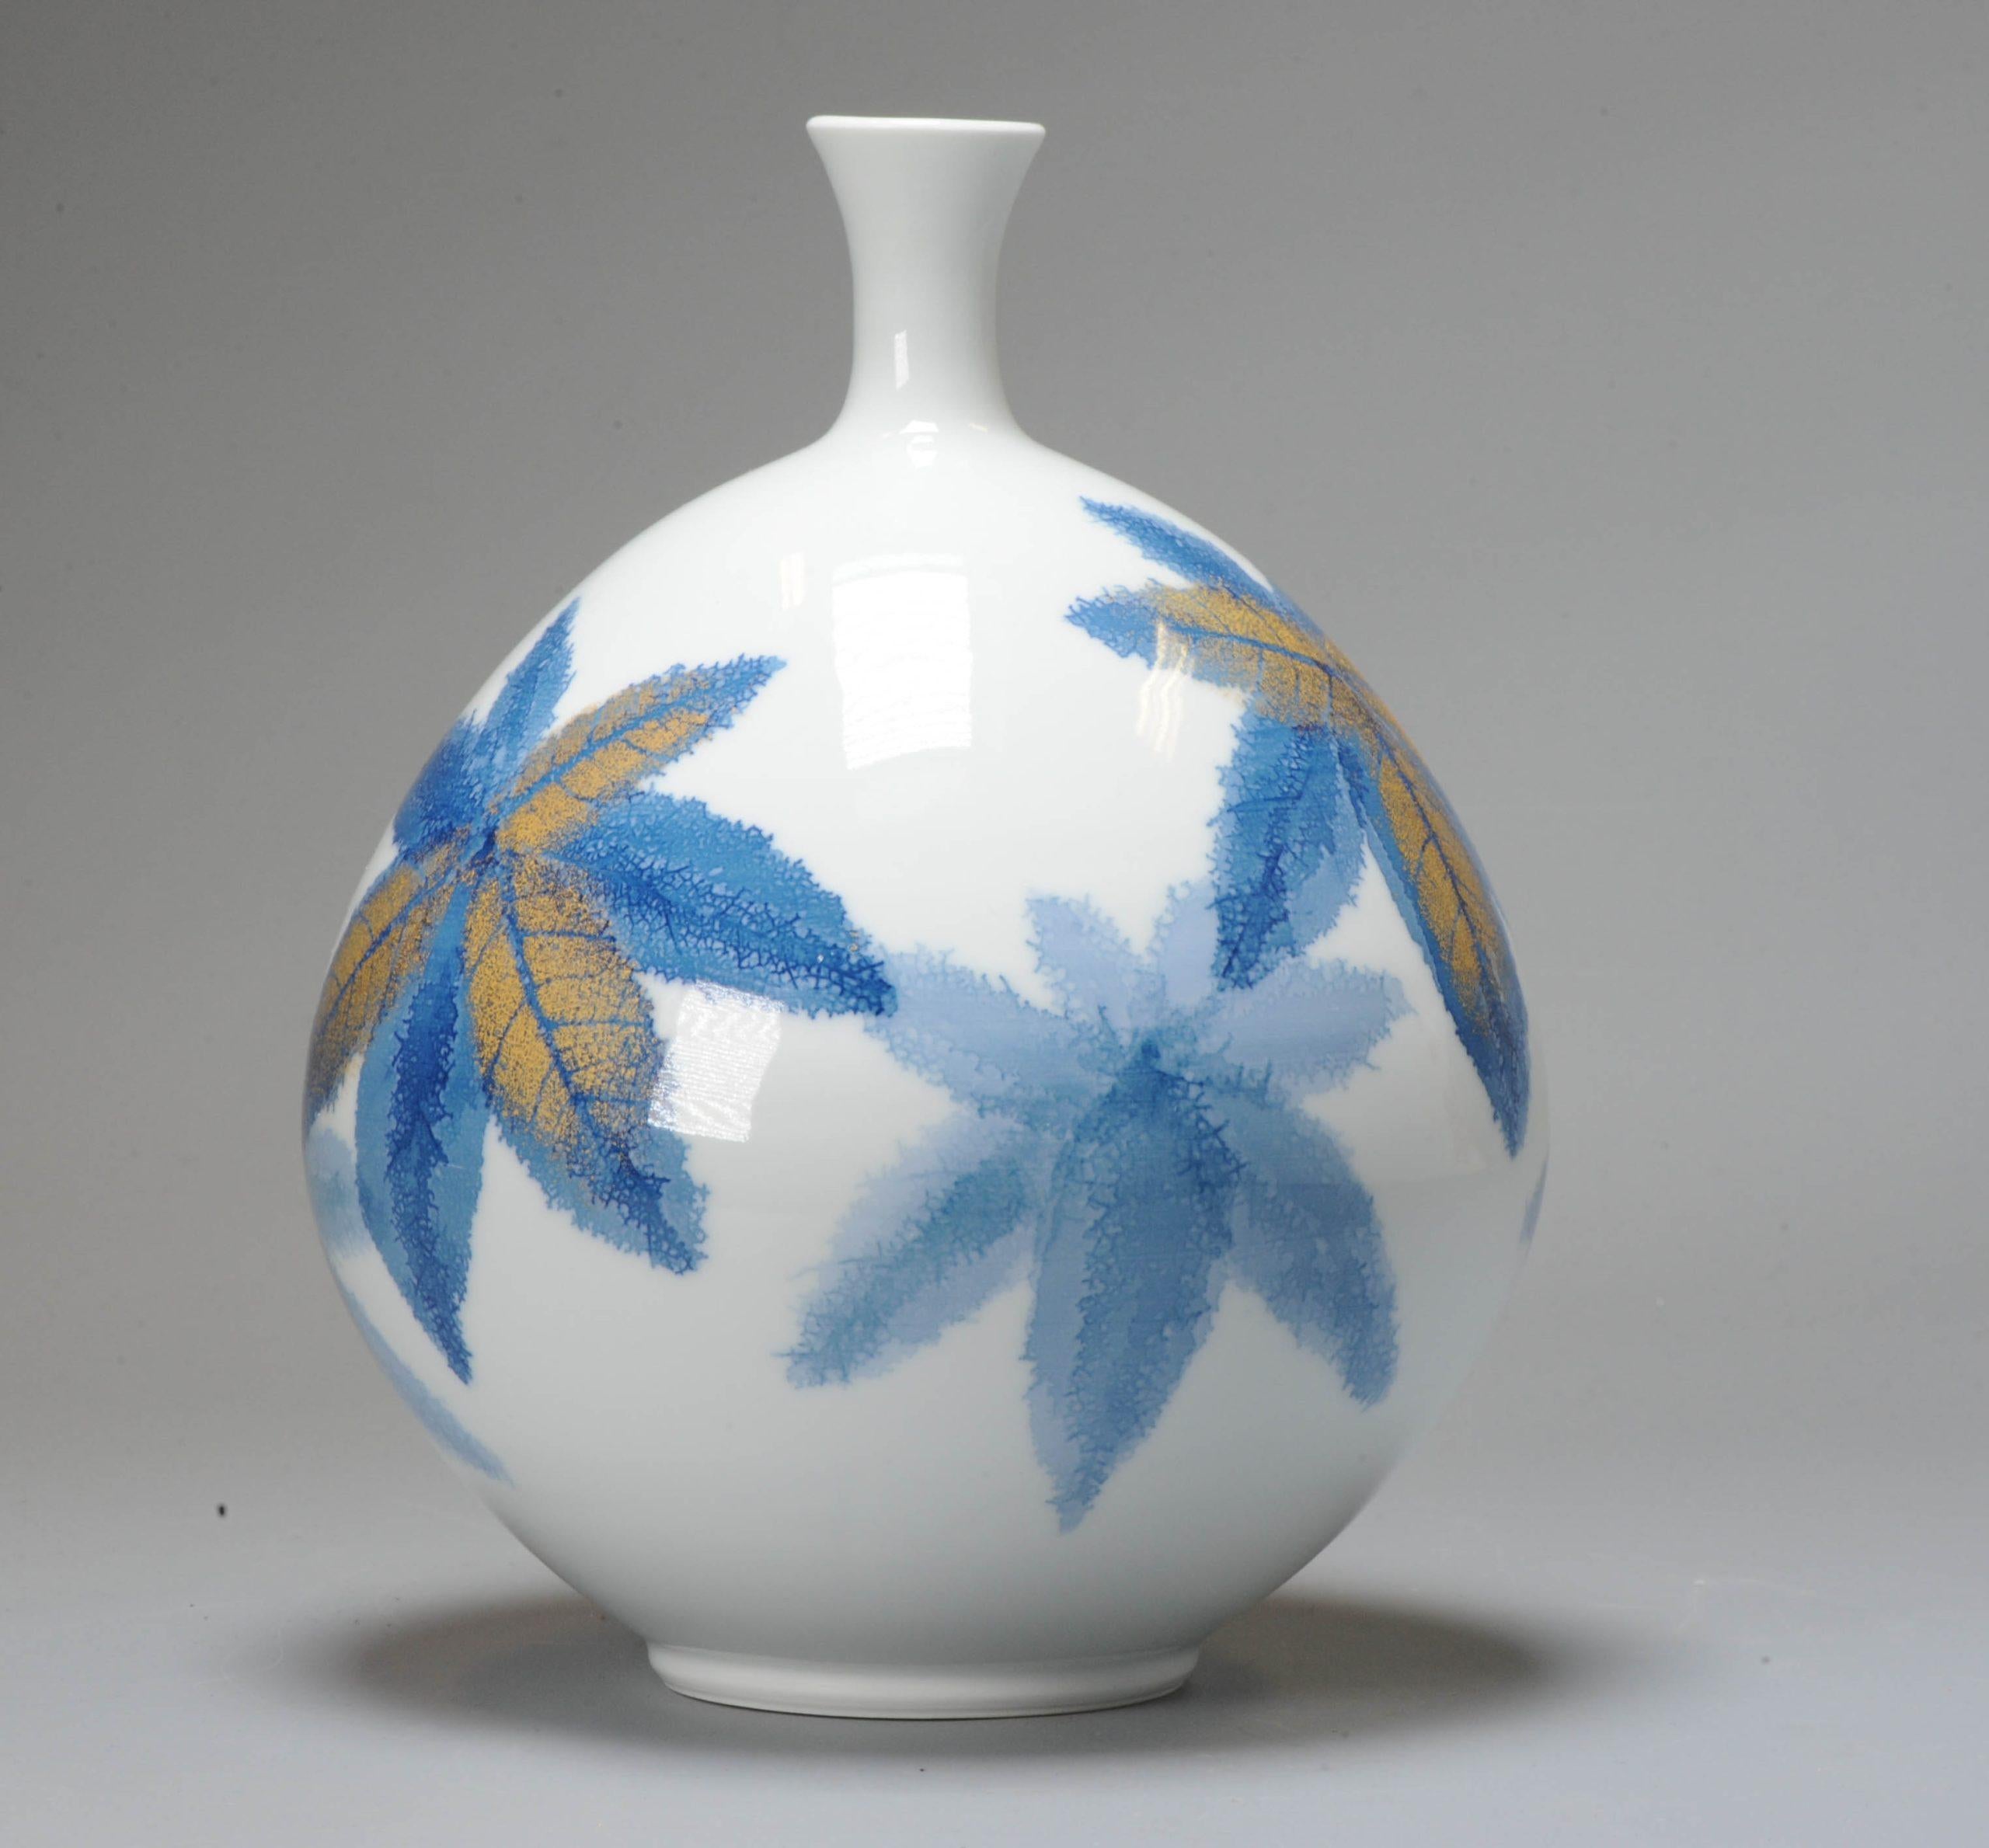 Lovely and rare piece

A superb blue and white porcelain vase. It has a leaf pattern on both front and back. Signed Shumei to base.

Fujii Mr. Aki Fujii's specialty is the technique of drawing a mountain by simulating the veins of a leaf, called the